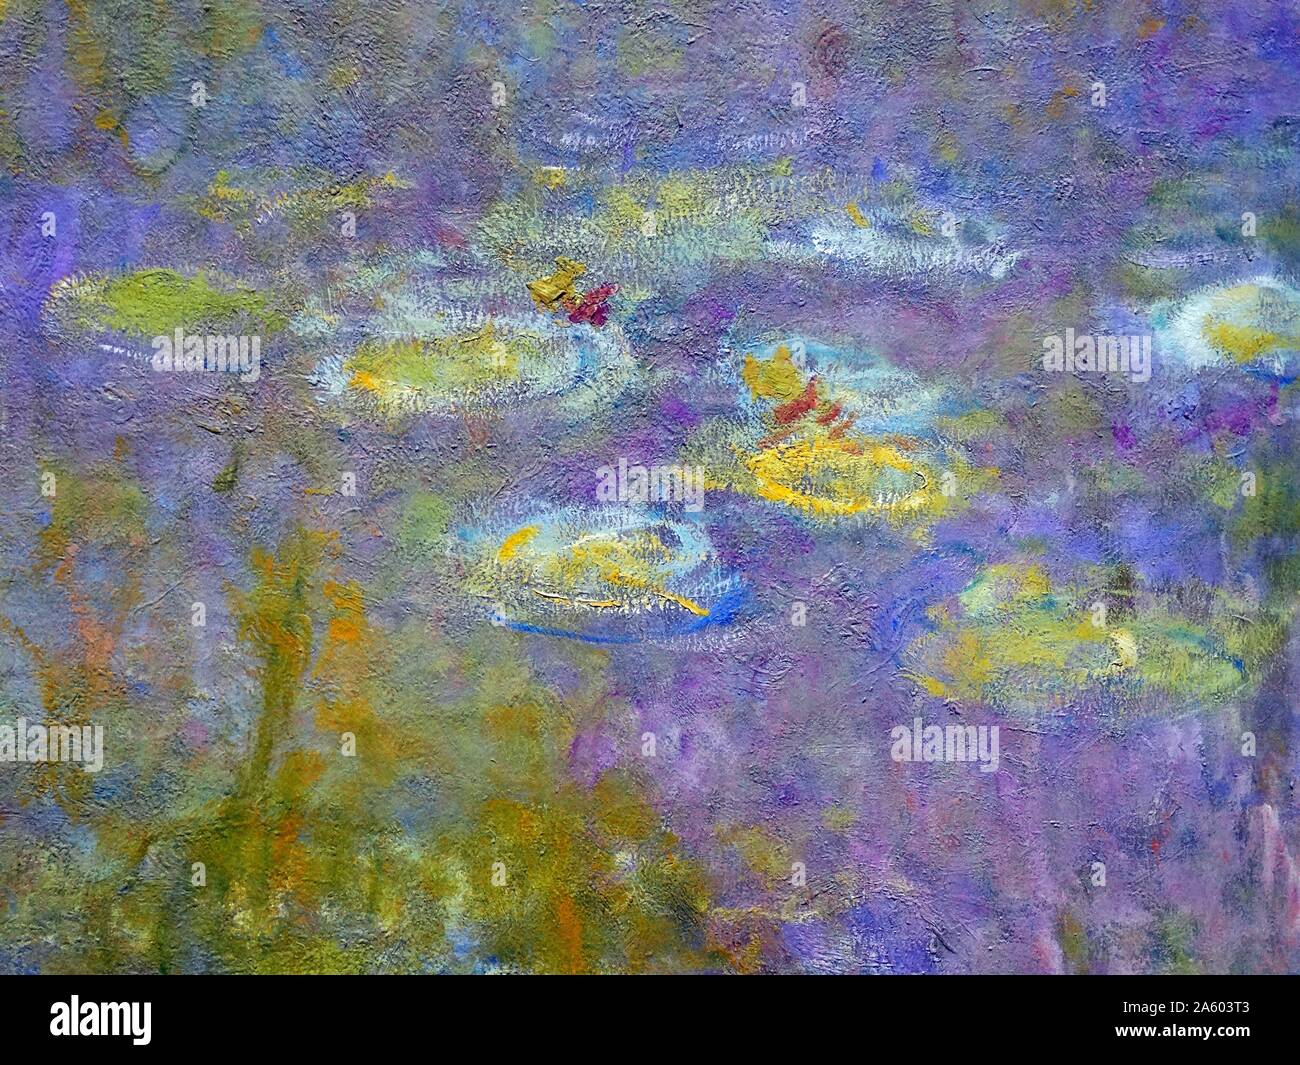 Painting titled 'Water-Lilies' by Claude Monet (1840-1926) French Impressionist painter. Dated 19th Century Stock Photo